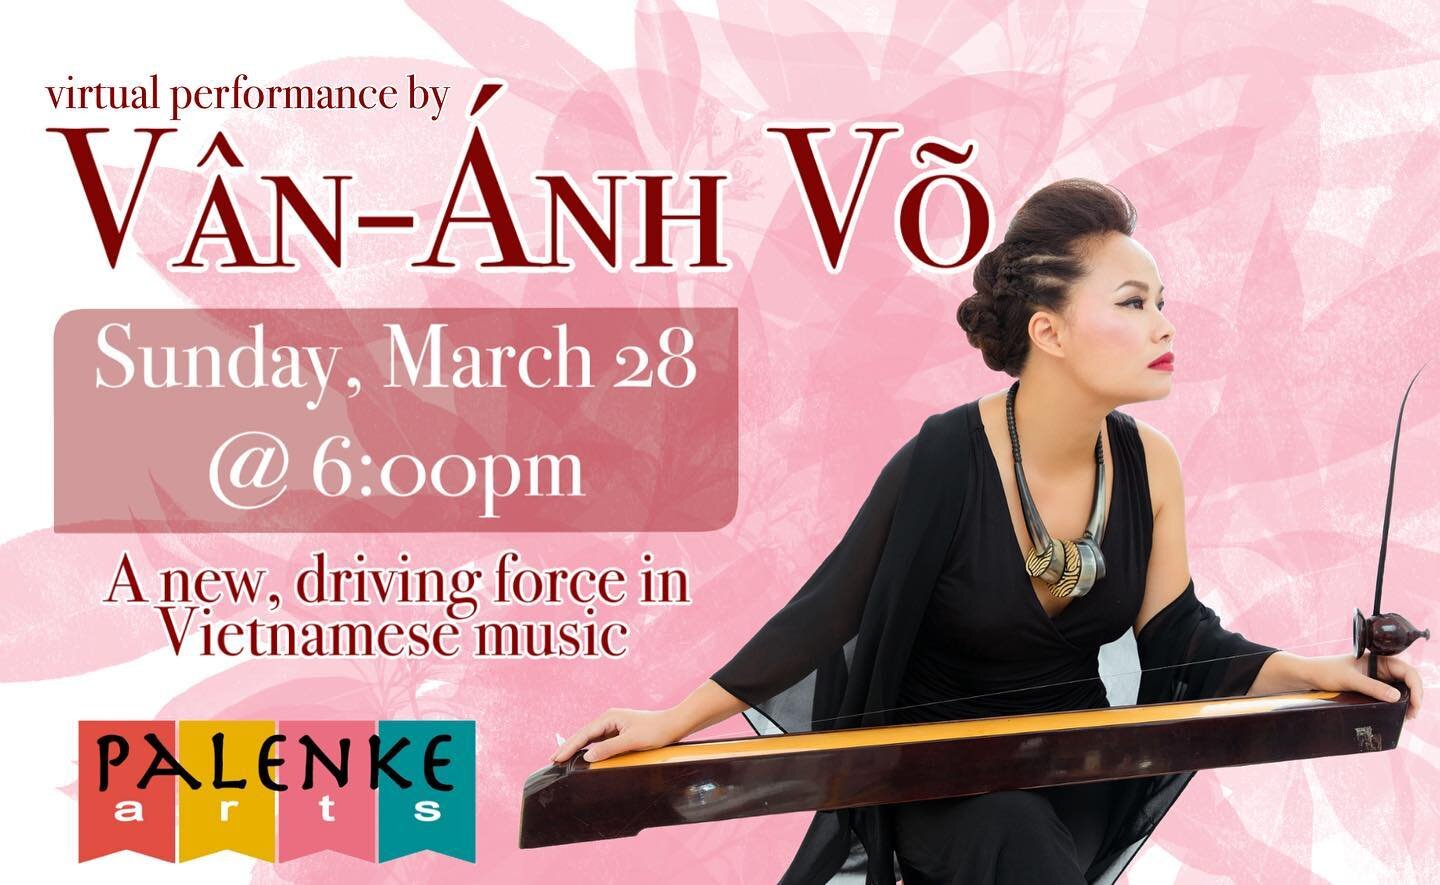 Mark your calendars! 🗓 On Sunday, March 28 at 6 pm PST, V&acirc;n-&Aacute;nh (Vanessa) V&otilde;, a groundbreaking Vietnamese artist, will bless our virtual stage with her compelling blend of traditional Vietnamese music and other music genres. 🤩

